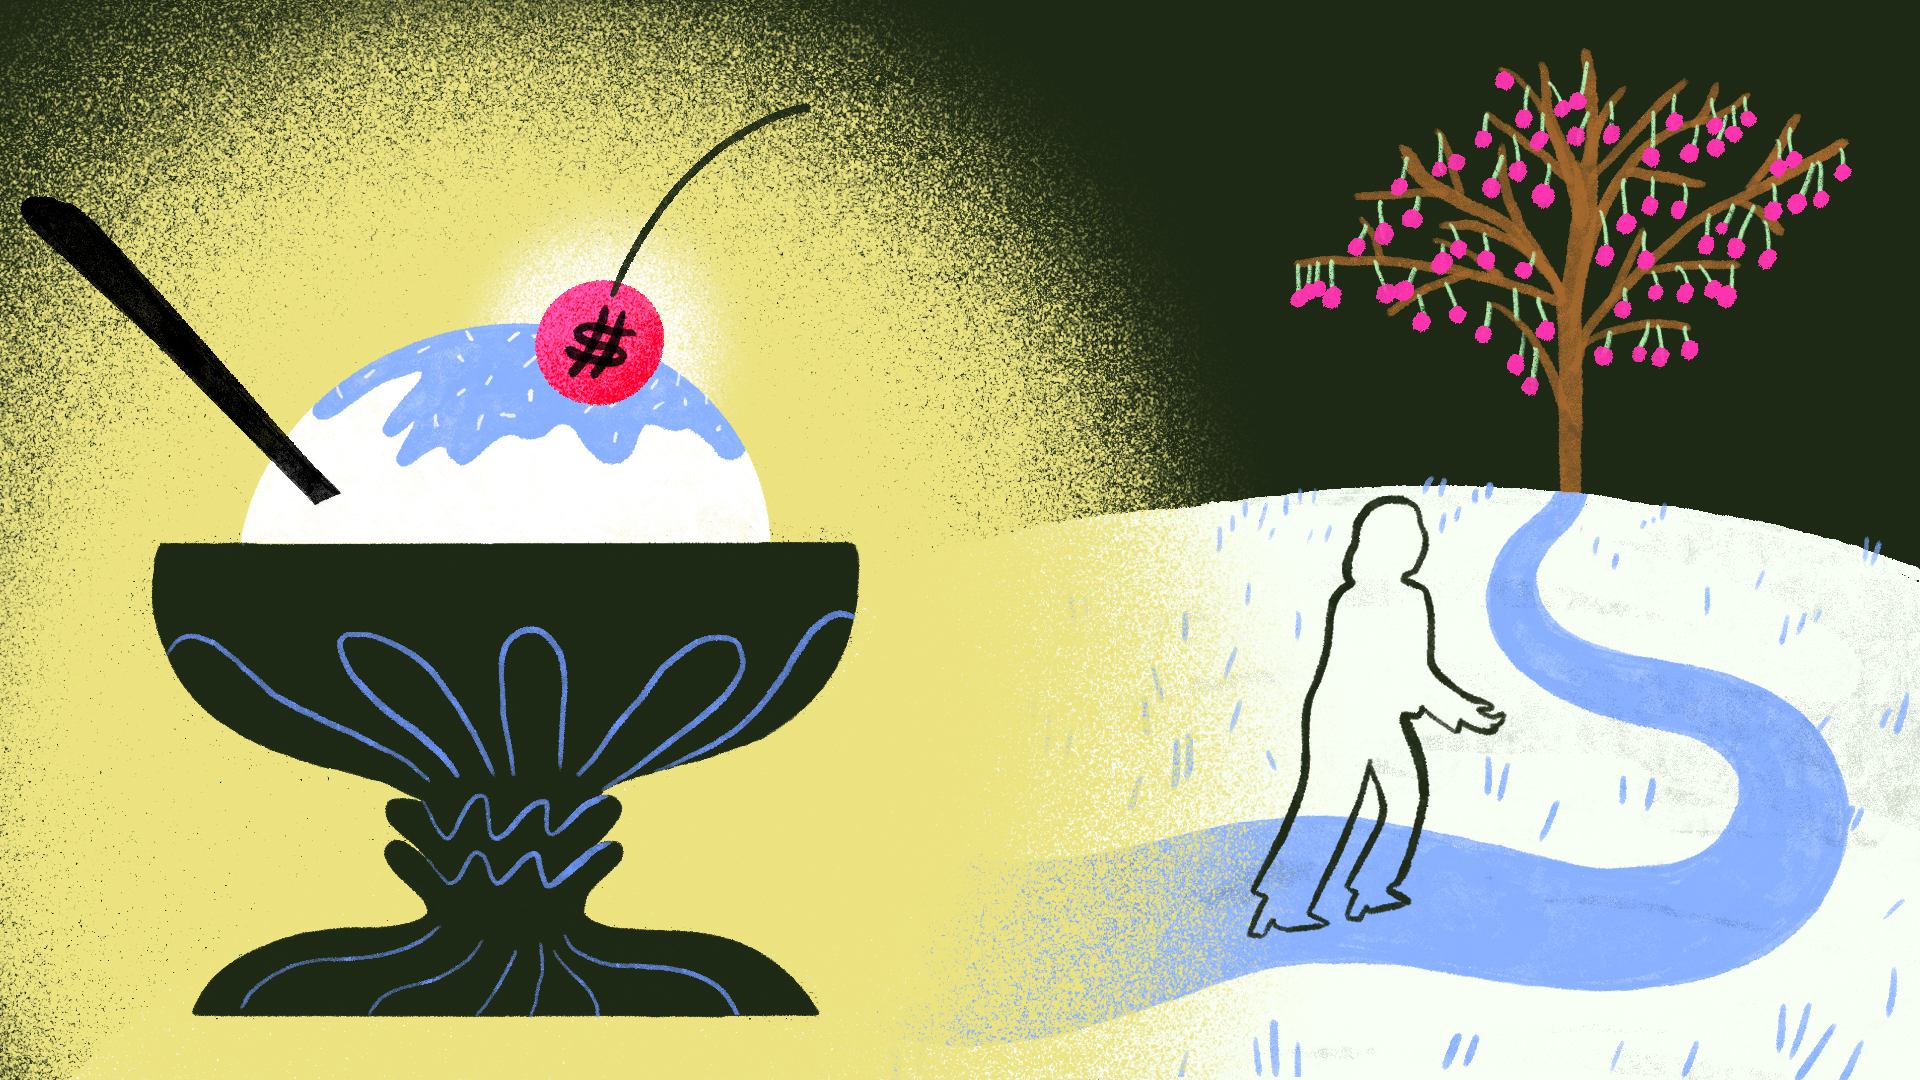 A woman is walking away from a sundae with a cherry on top in the direction of a cherry tree on a hill.